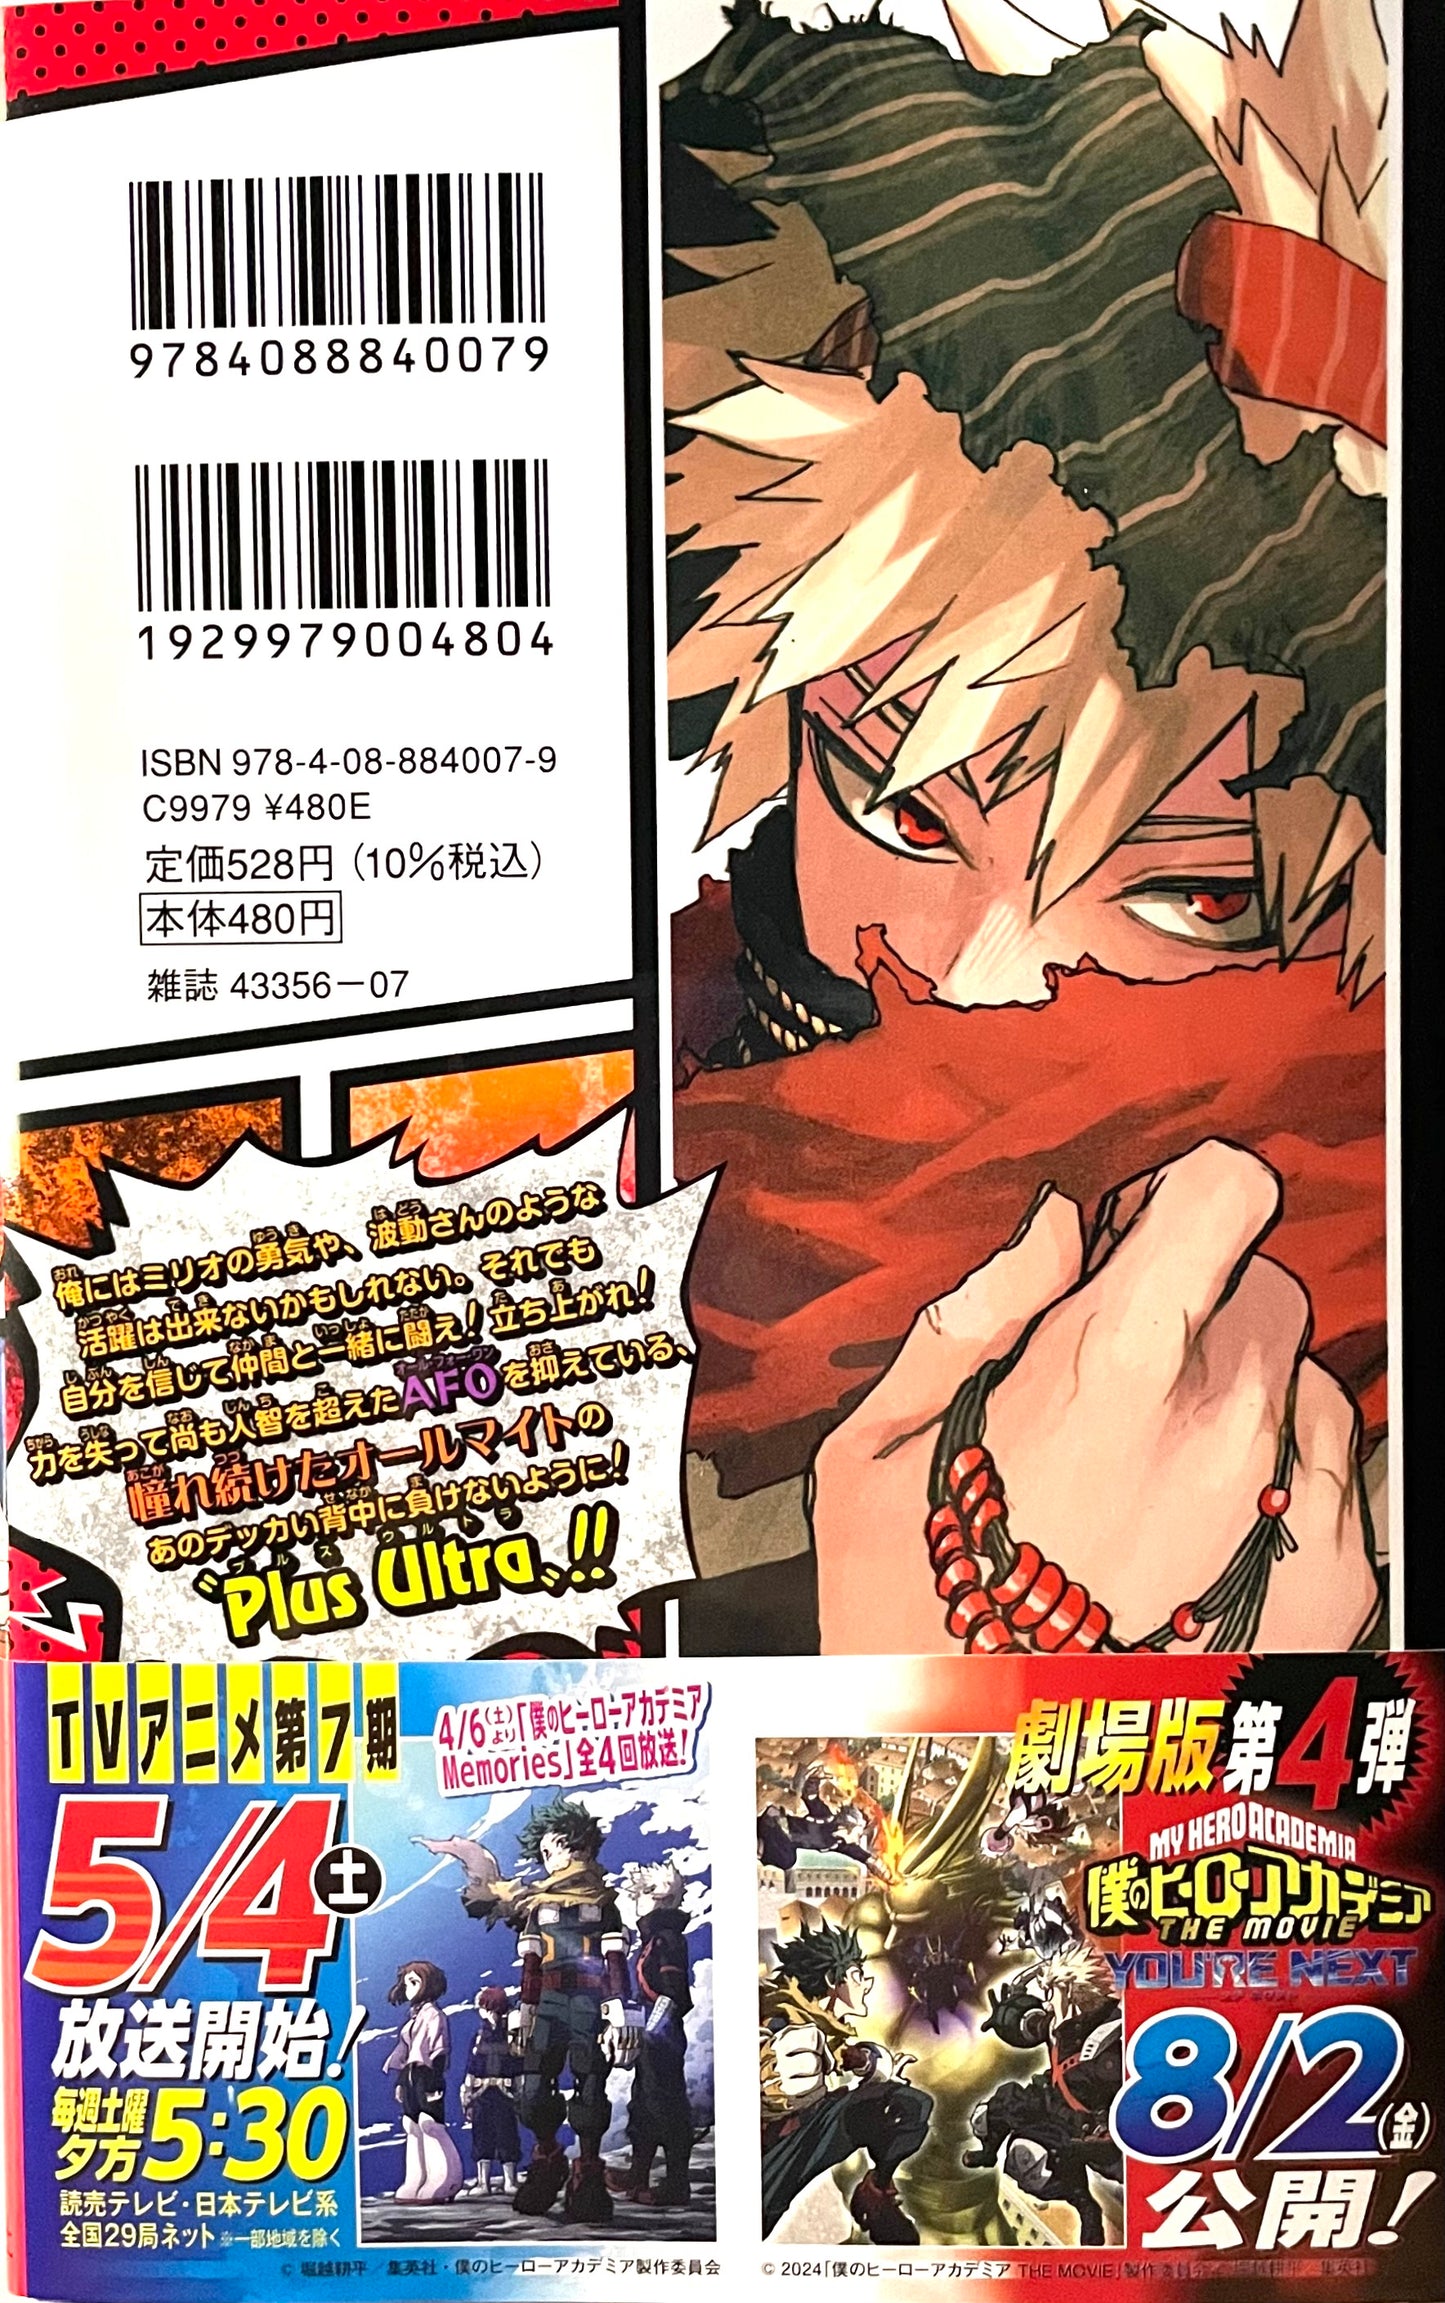 My Hero Academia Vol.40_NEW-Official Japanese Edition